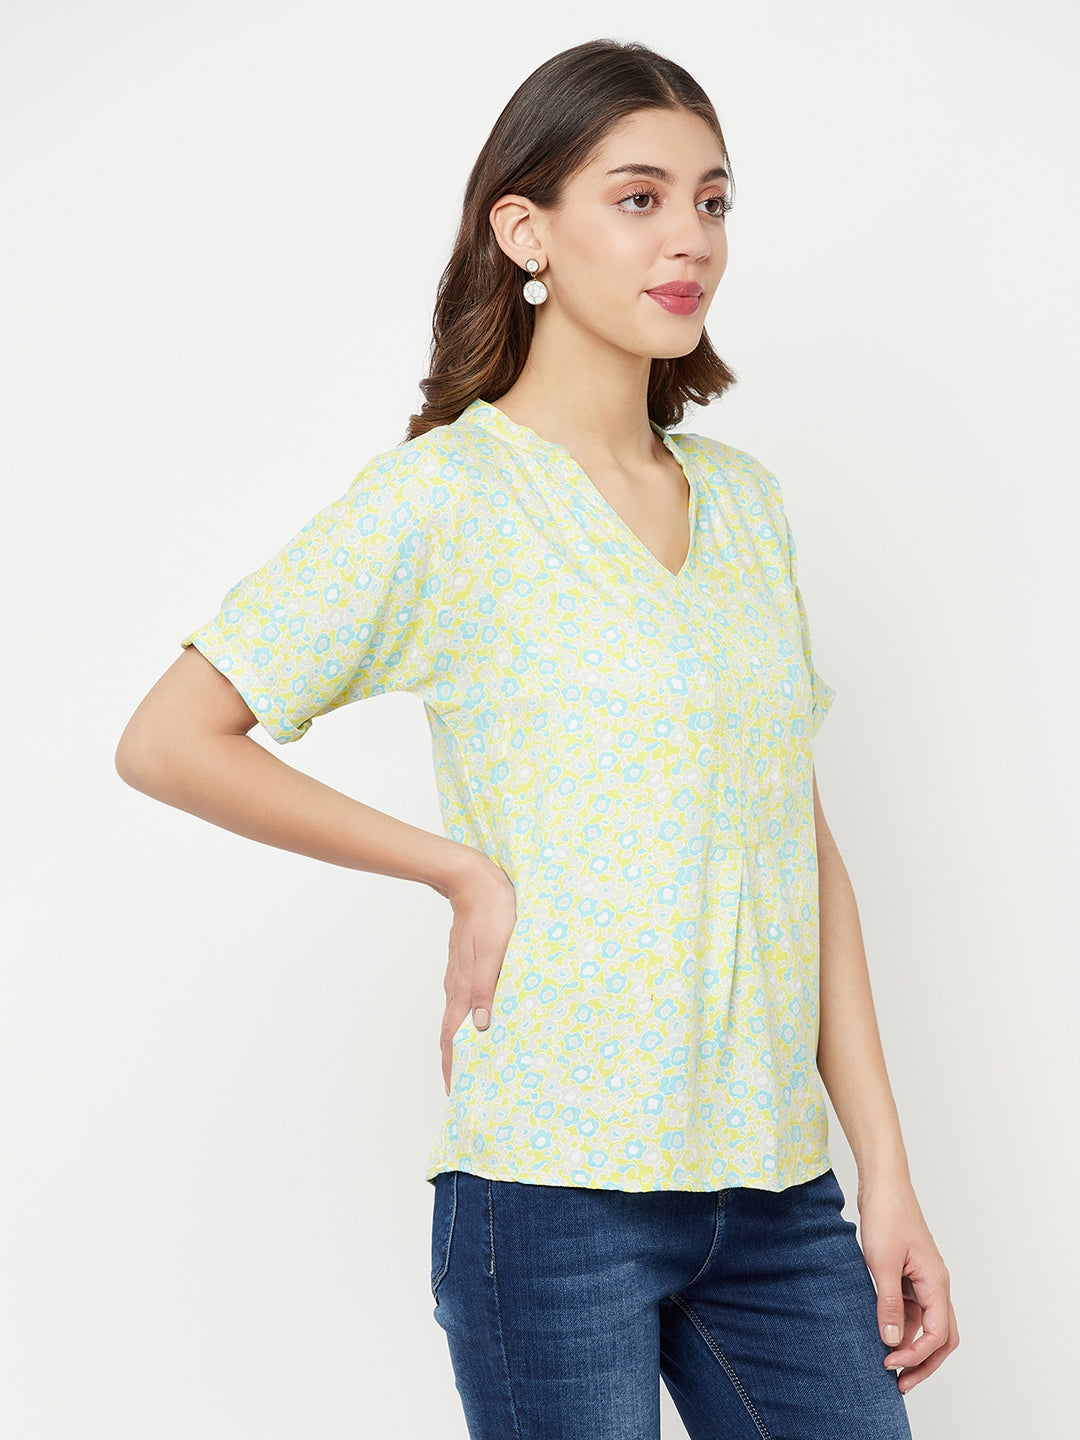 Green Floral Printed V-Neck Top - Women Tops